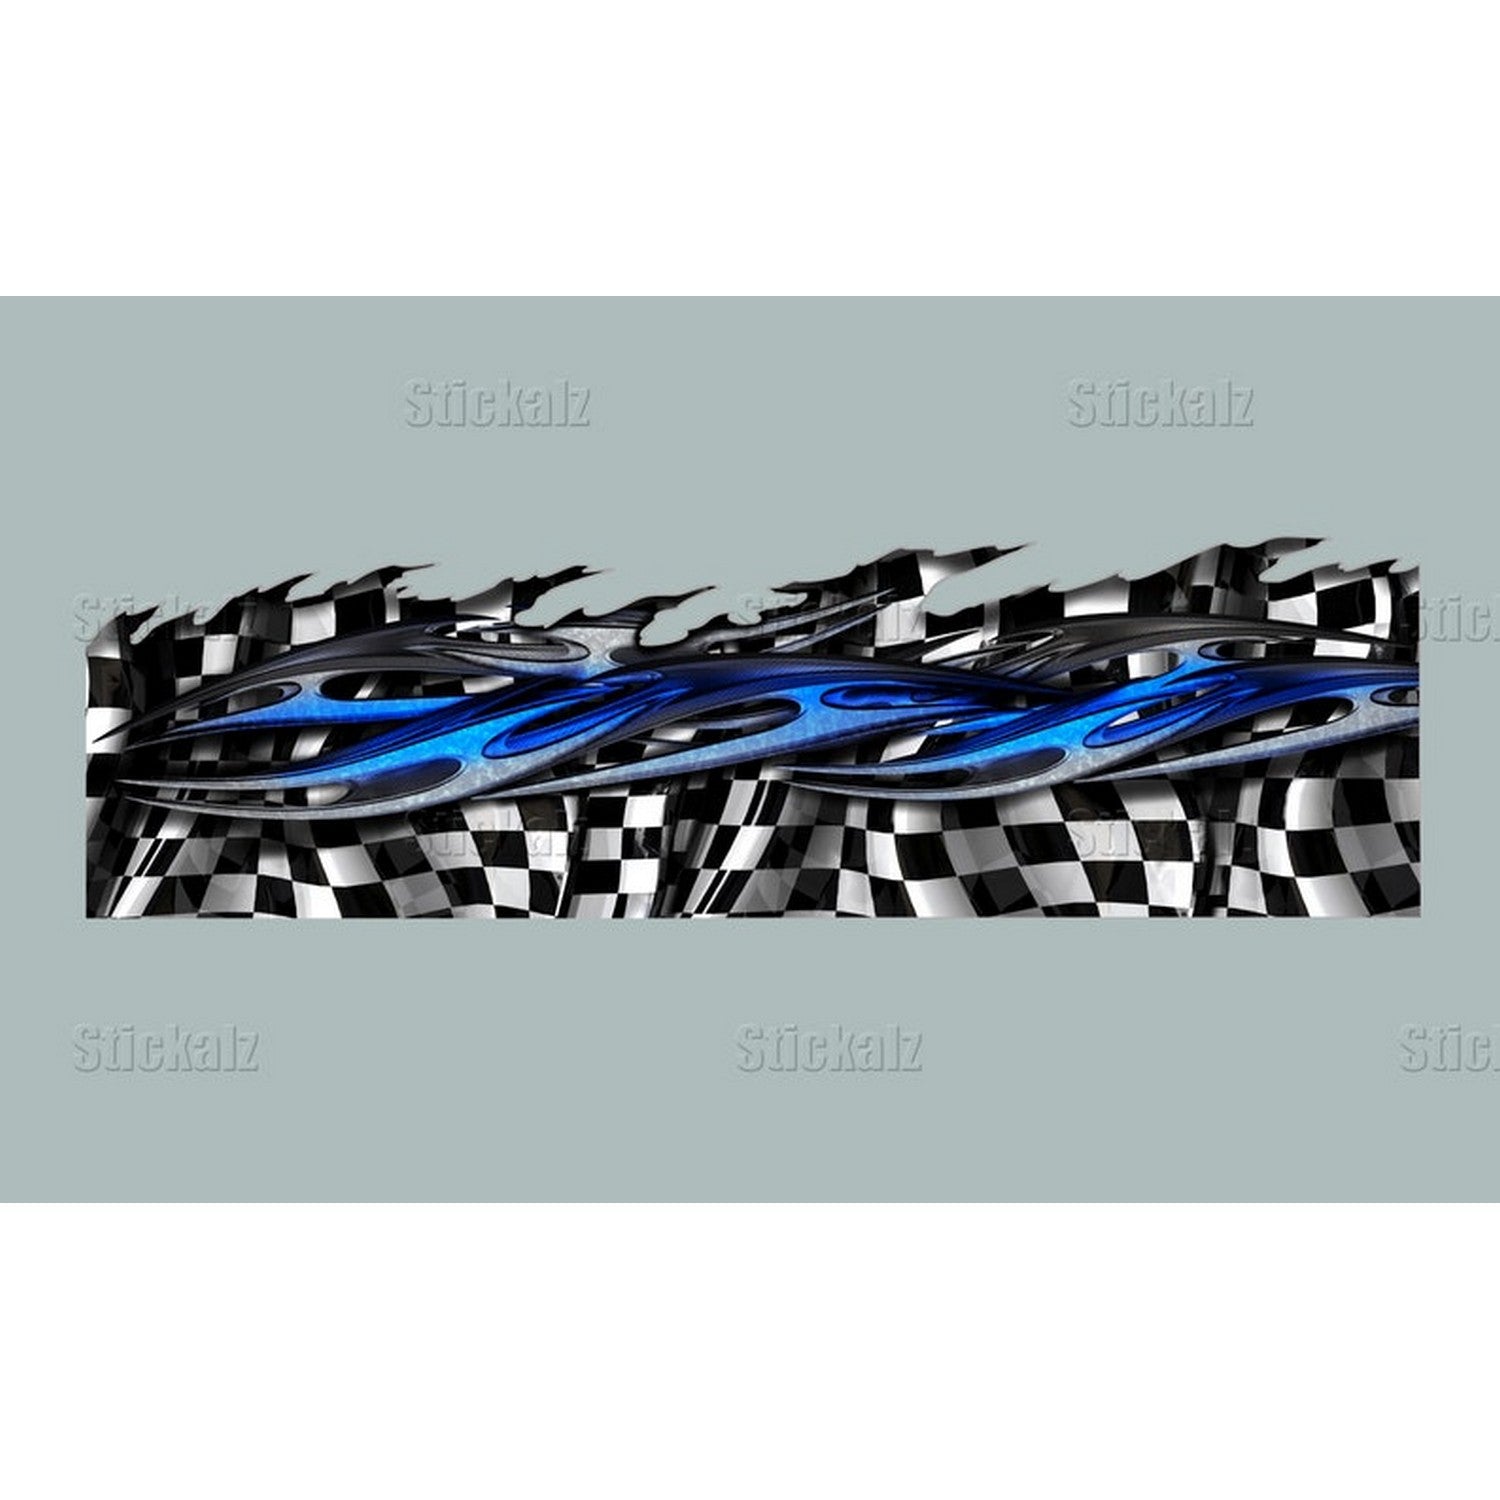 Racing Flag Sticker Ripped Metal Checkered Flag Boat Full Color Vinyl  Sticker Watercraft Vinyl Speed Boat Graphics Decal buy in online store  -Stickalz llc - US